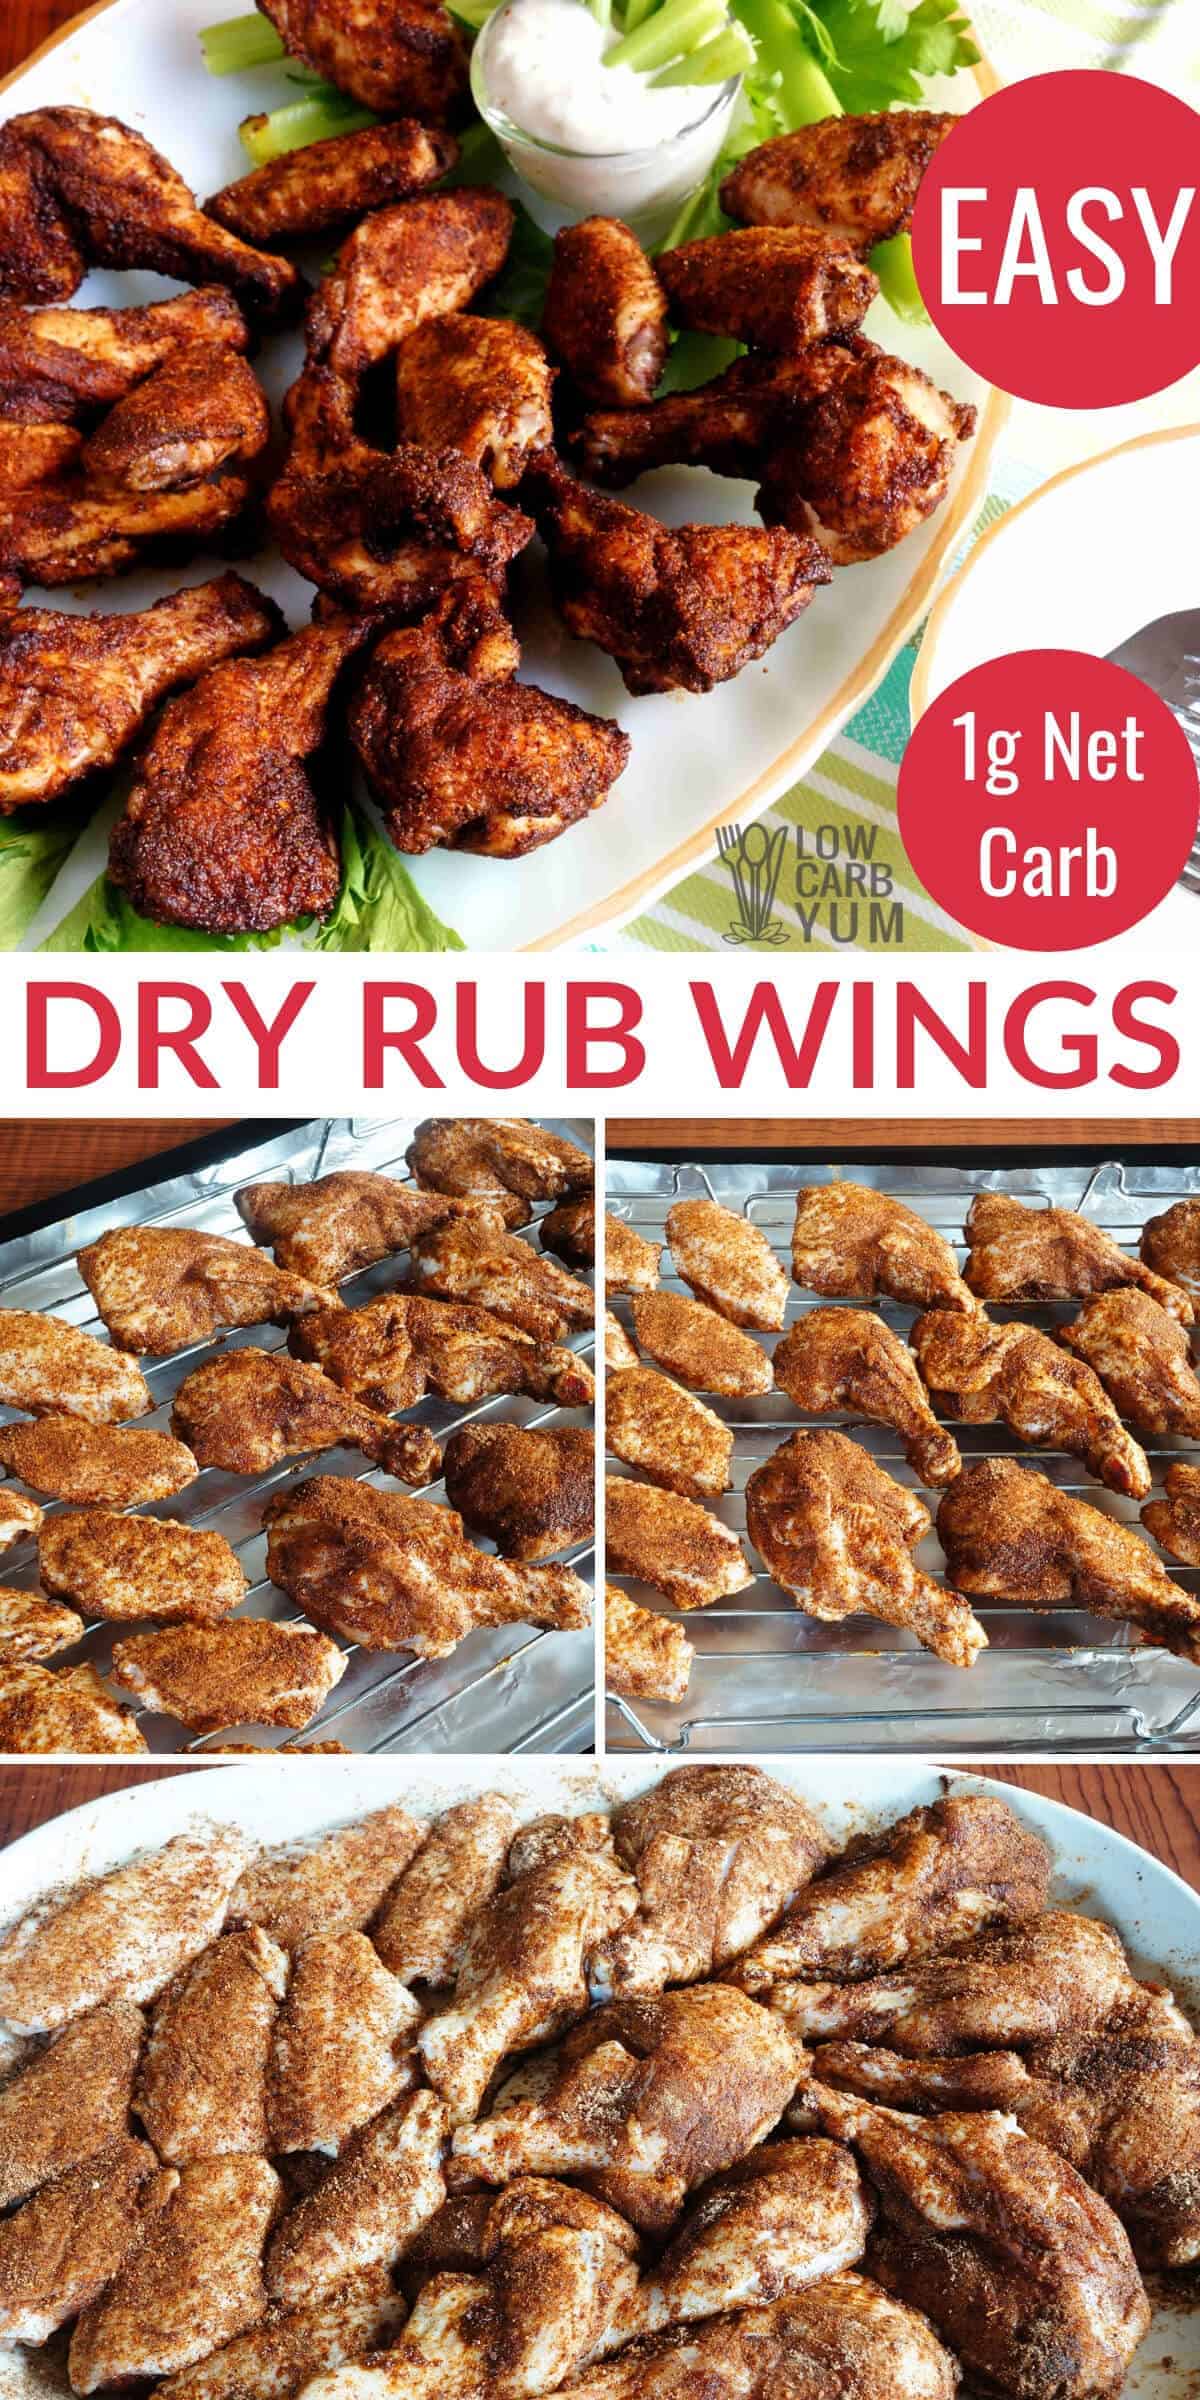 Easy Dry Rub Chicken Wings in Oven or Air Fryer - Low Carb Yum